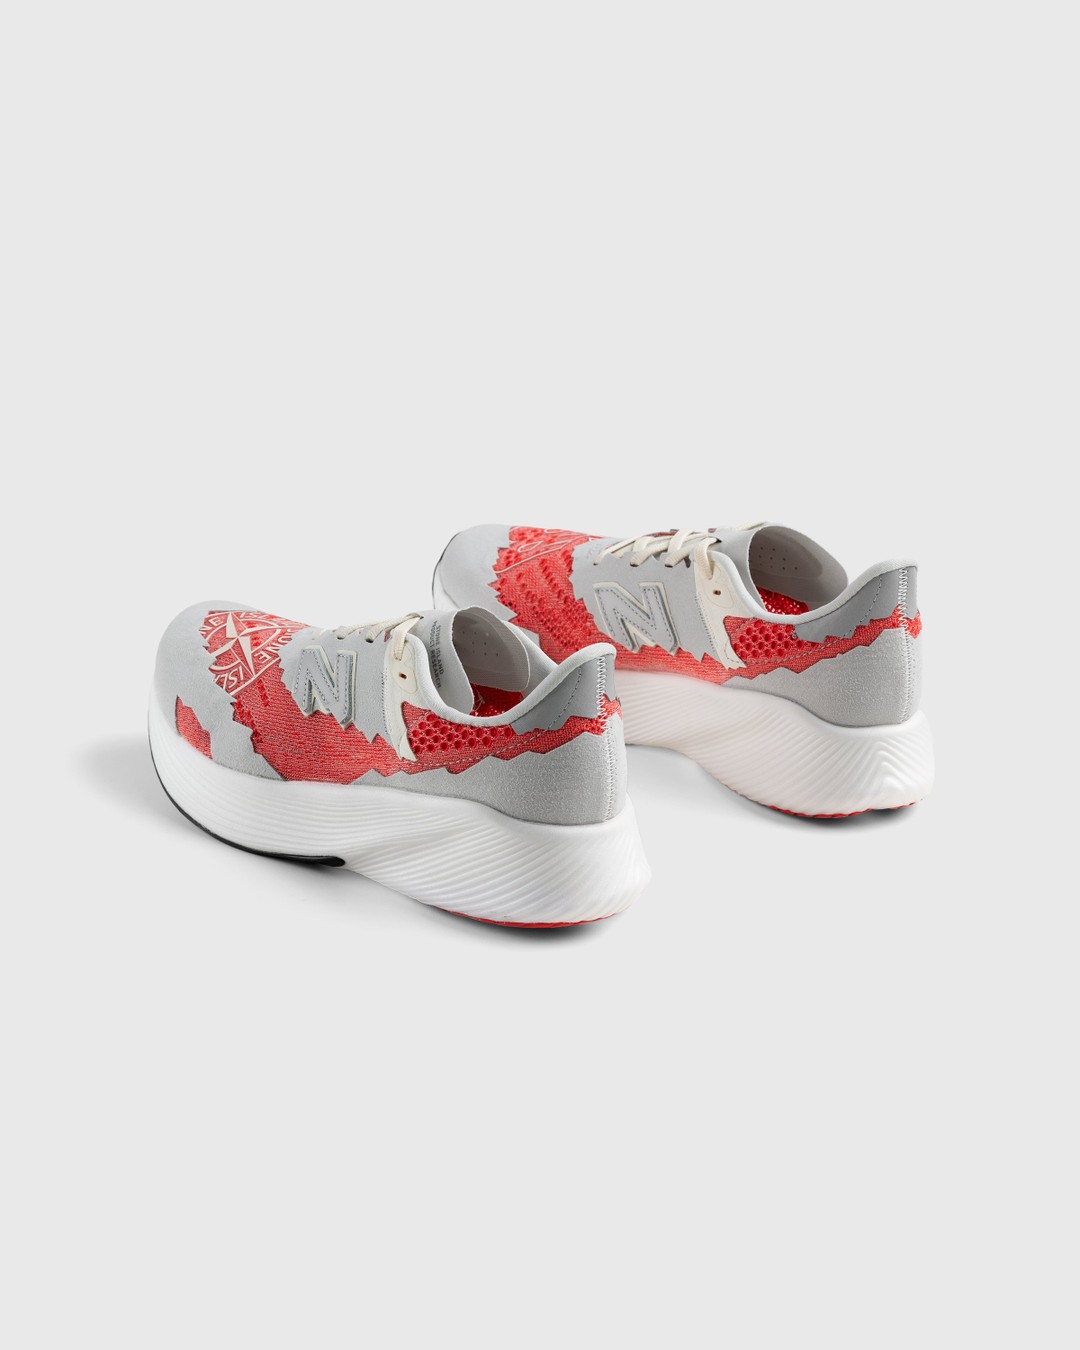 New Balance x Stone Island – FuelCell RC Elite v2 Neo Flame - Sneakers - Red - Image 3